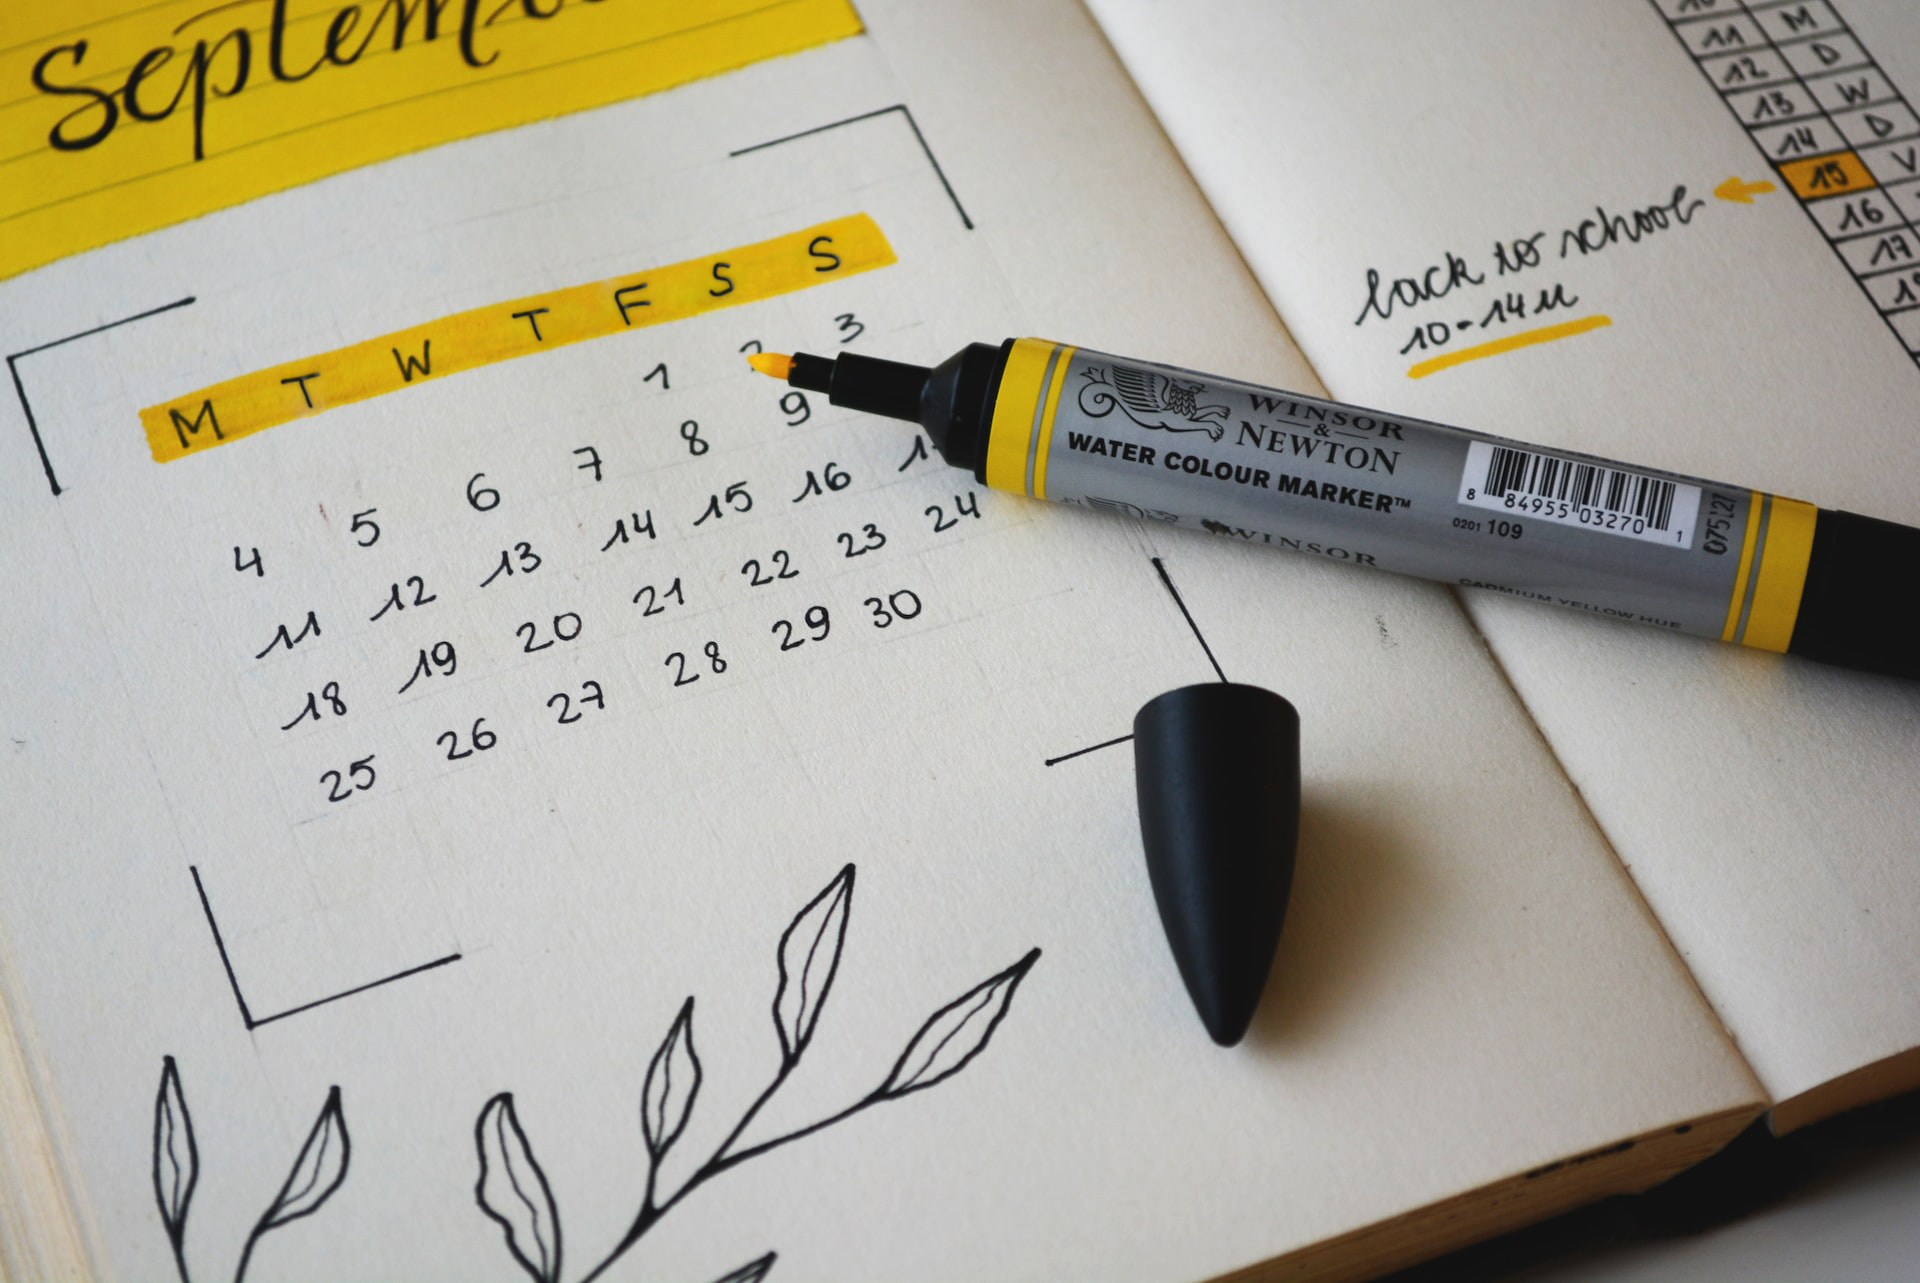 Calendar notebook showing September month highlighted in yellow